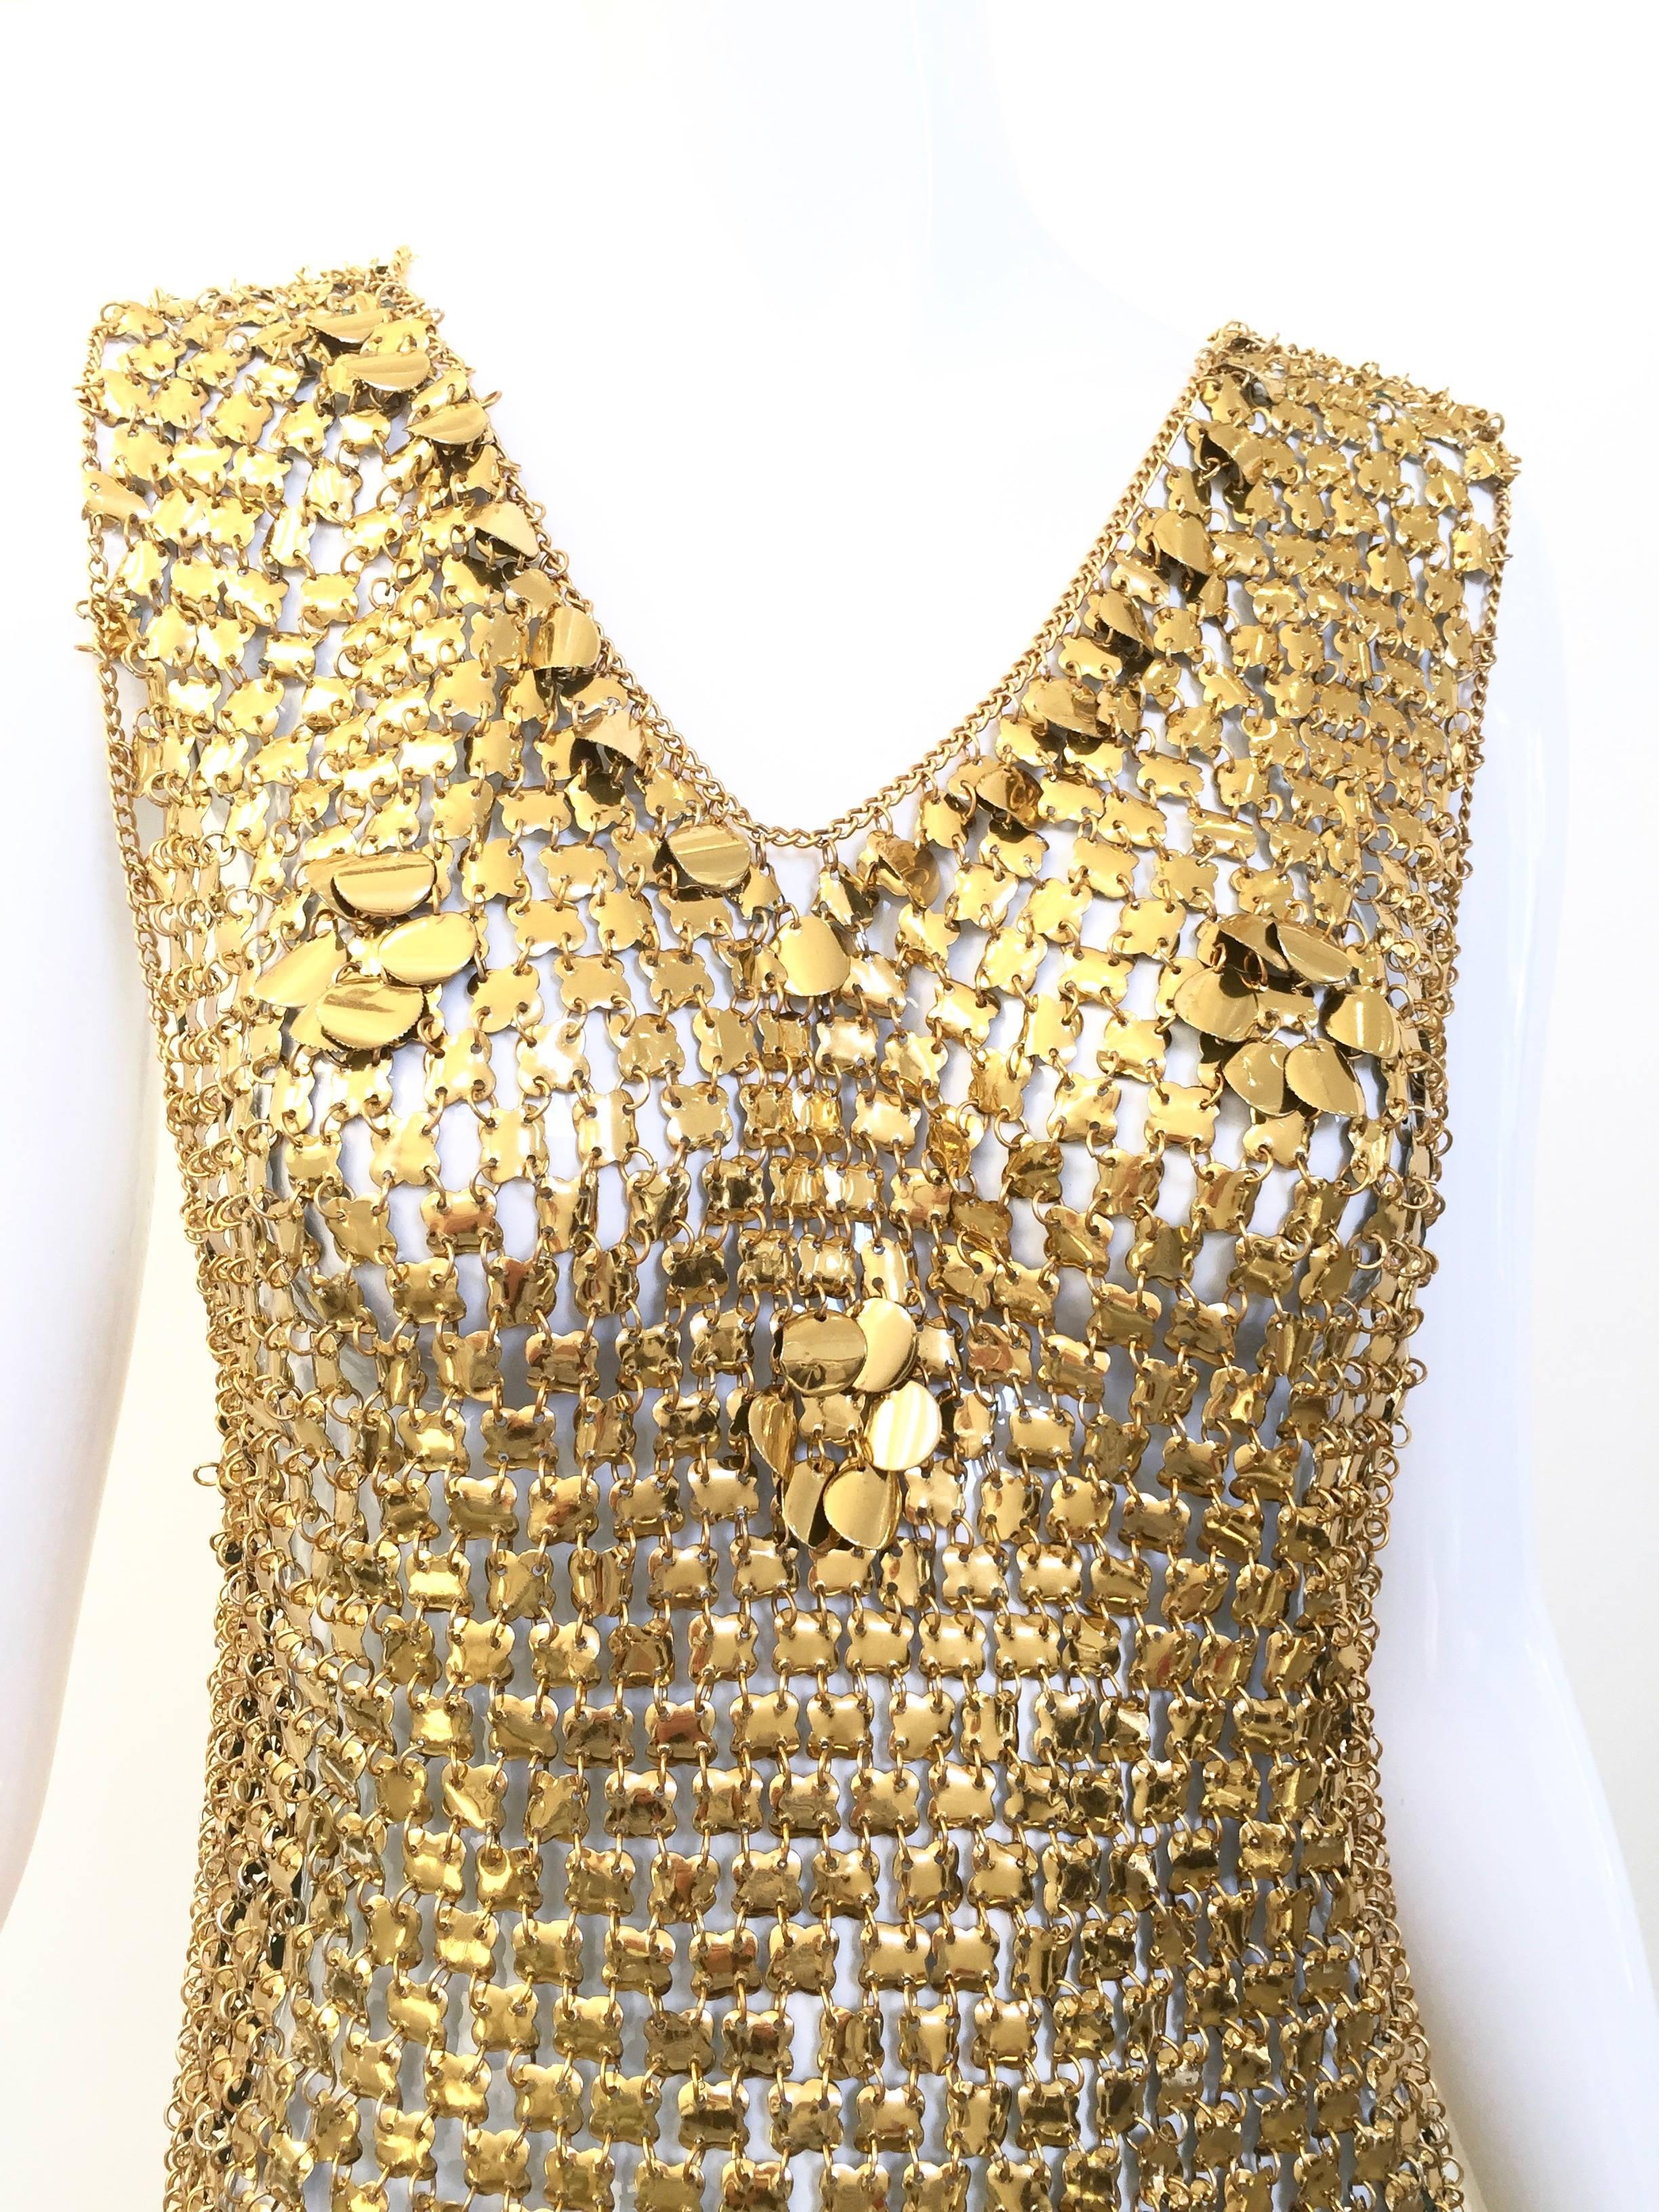 1970s Paco Rabanne gold chain mail dress.
In excellent condition.

Fit size 4 